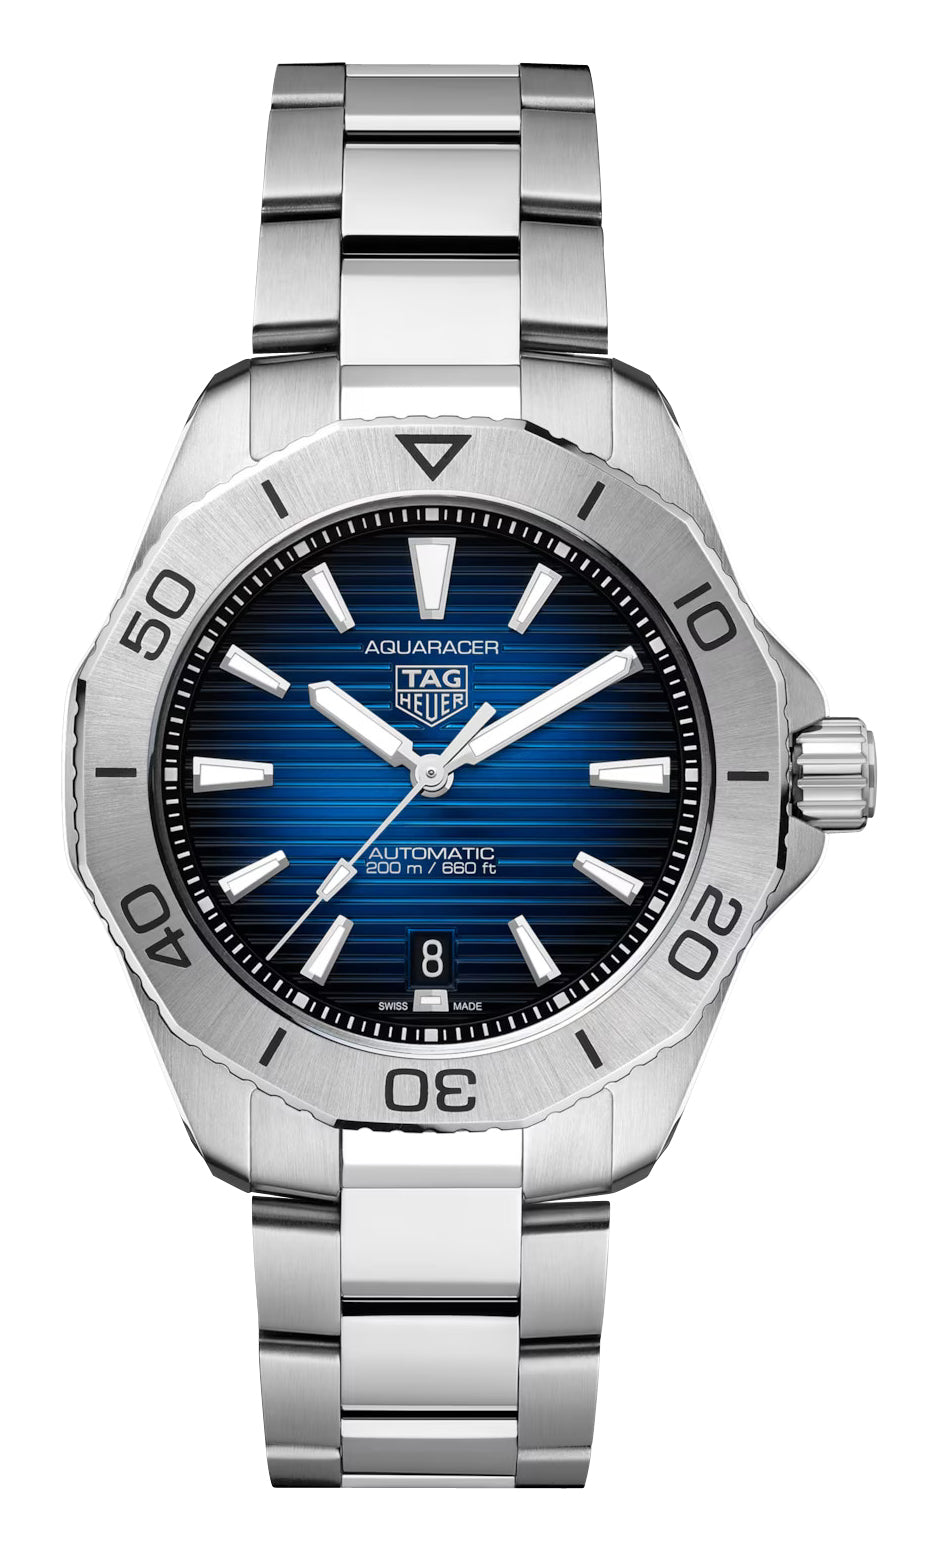 update alt-text with template Watches - Mens-Tag Heuer-WBP2111.BA0627-35 - 40 mm, 40 - 45 mm, Aquaracer, blue, date, divers, mens, menswatches, new arrivals, round, rpSKU_WAZ2011.BA0842, rpSKU_WBP1110.BA0627, rpSKU_WBP2010.BA0632, rpSKU_WBP201A.BA0632, rpSKU_WBP201B.BA0632, stainless steel band, stainless steel case, swiss automatic, TAG Heuer, uni-directional rotating bezel, watches-Watches & Beyond